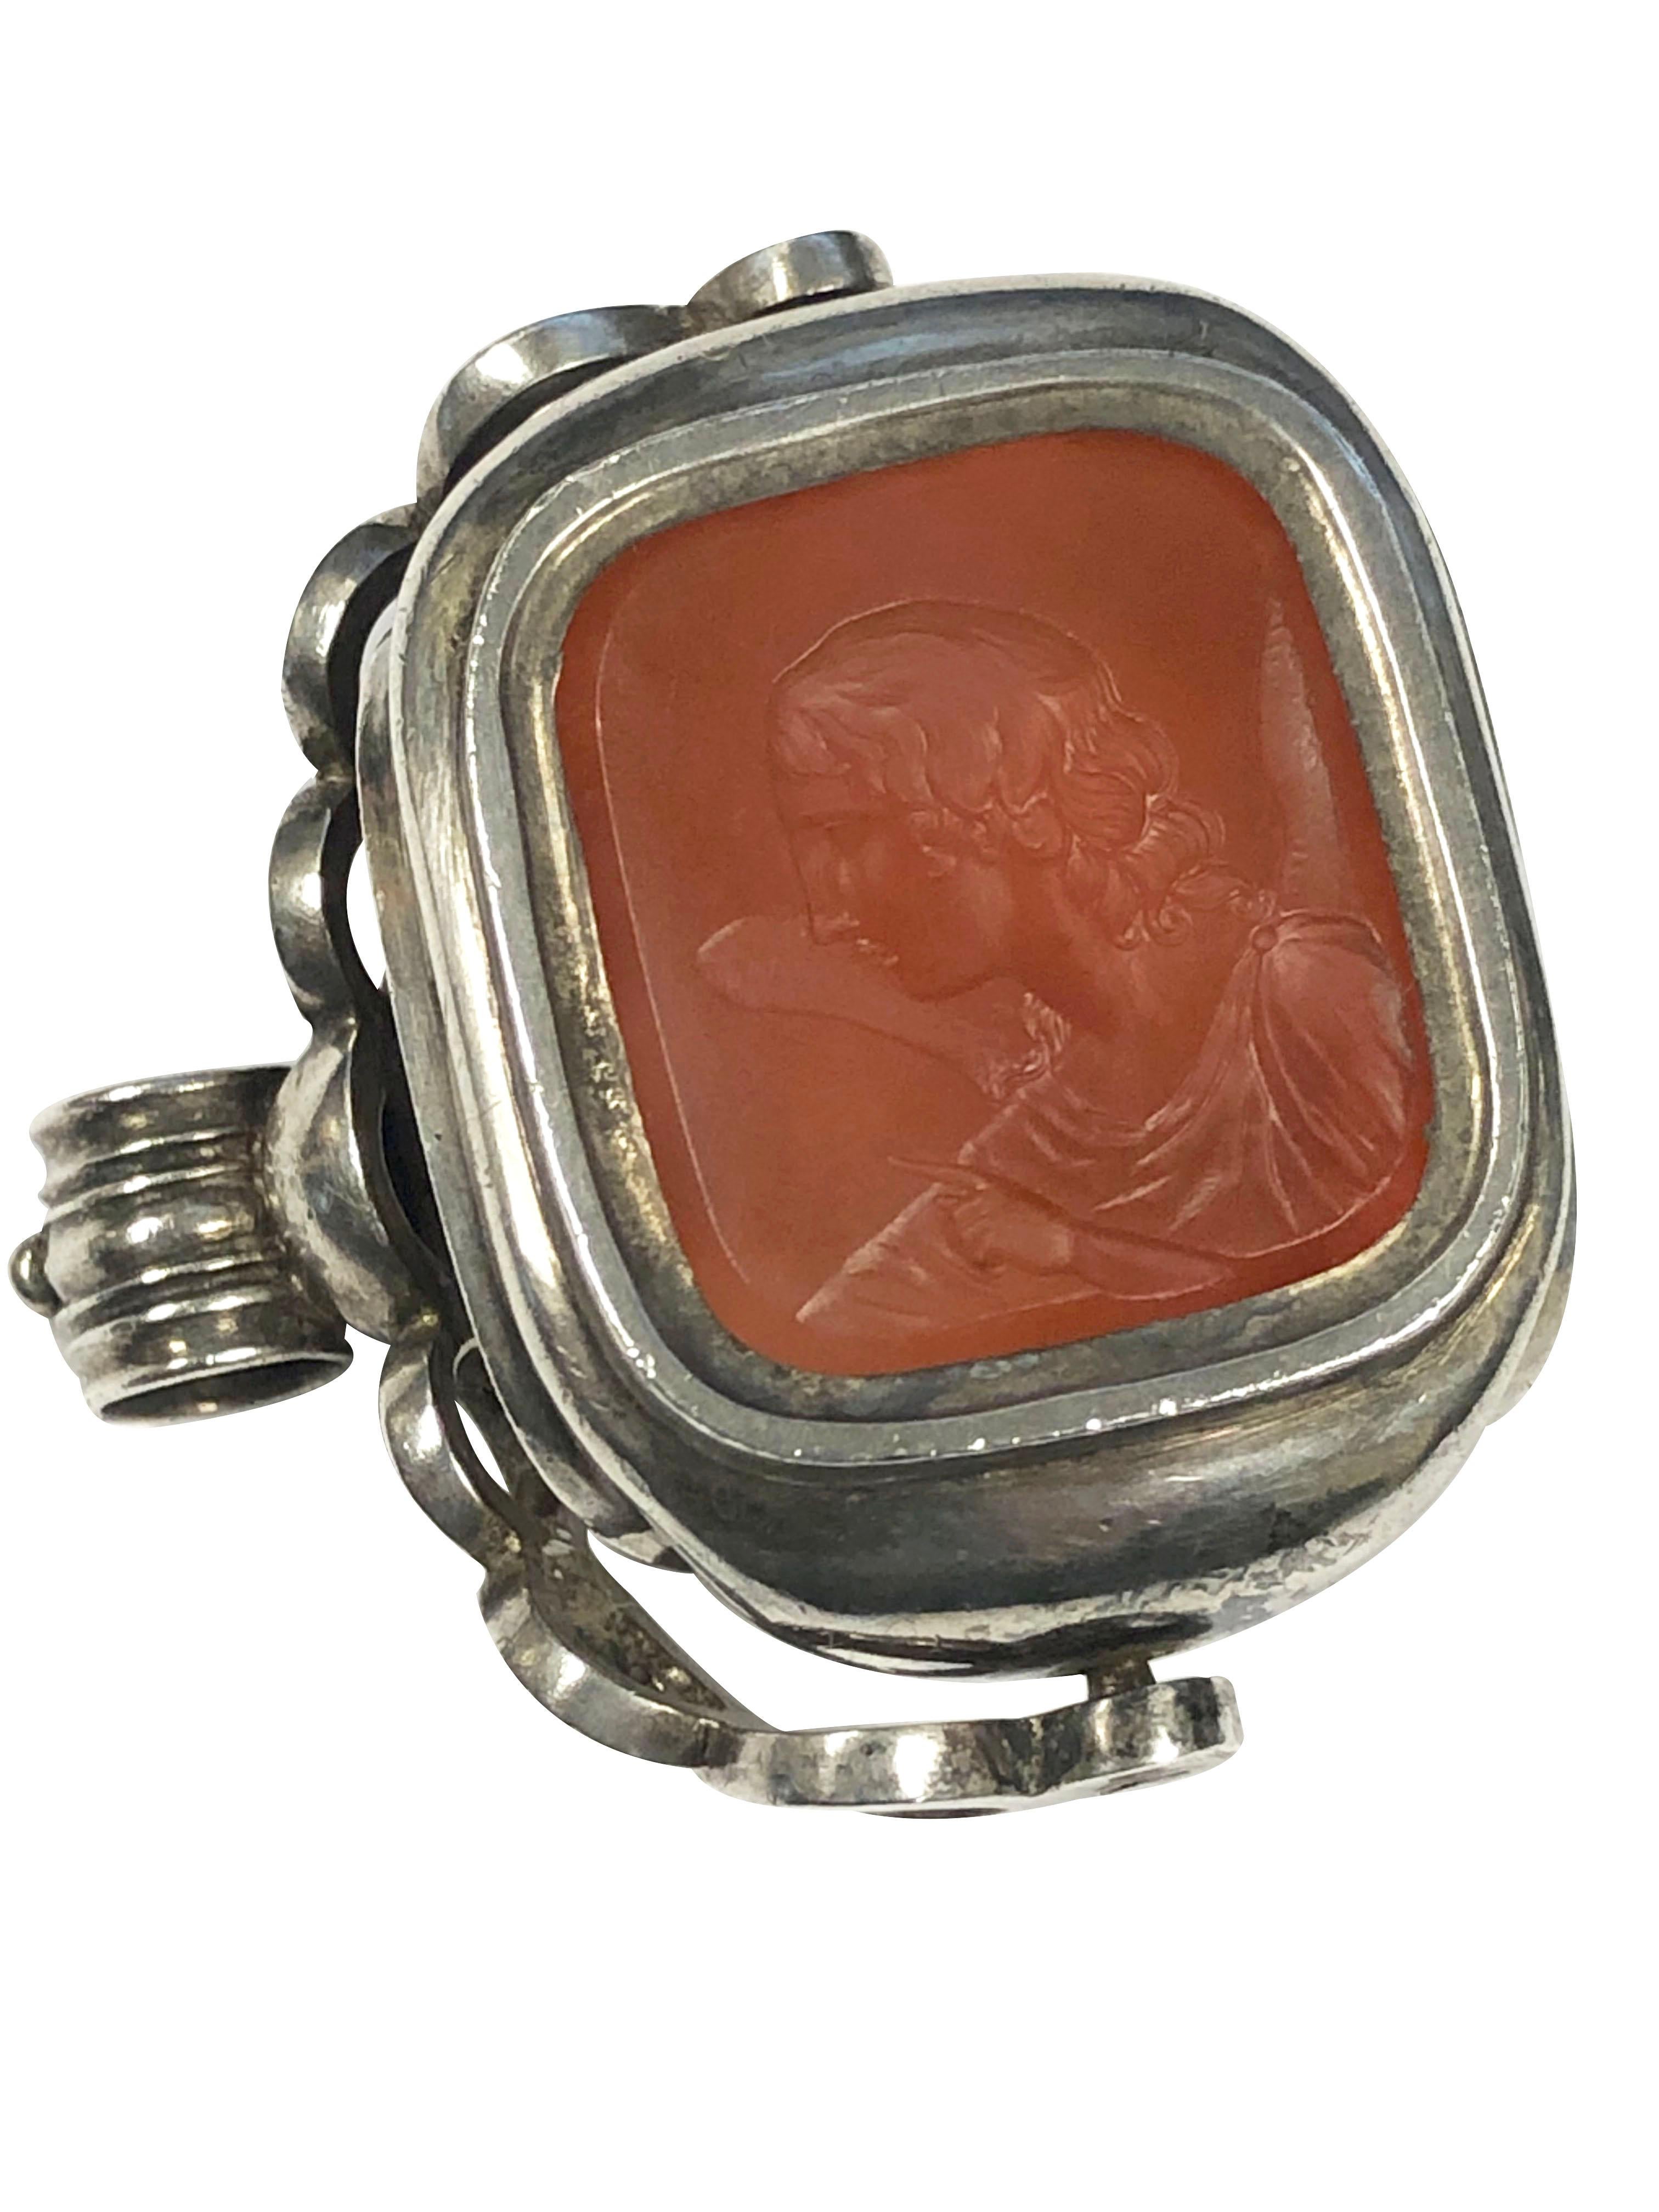 Circa 1840 - 1850 Silver Seal Fob, this triple Fob measures 1 1/2 X 1 1/2 inches,  2 of the Intaglio Seals are Foil Backed Citrine with Depp carved Latin wording and other depictions and the third is Carved Carnelian with a Winged figure. One of the